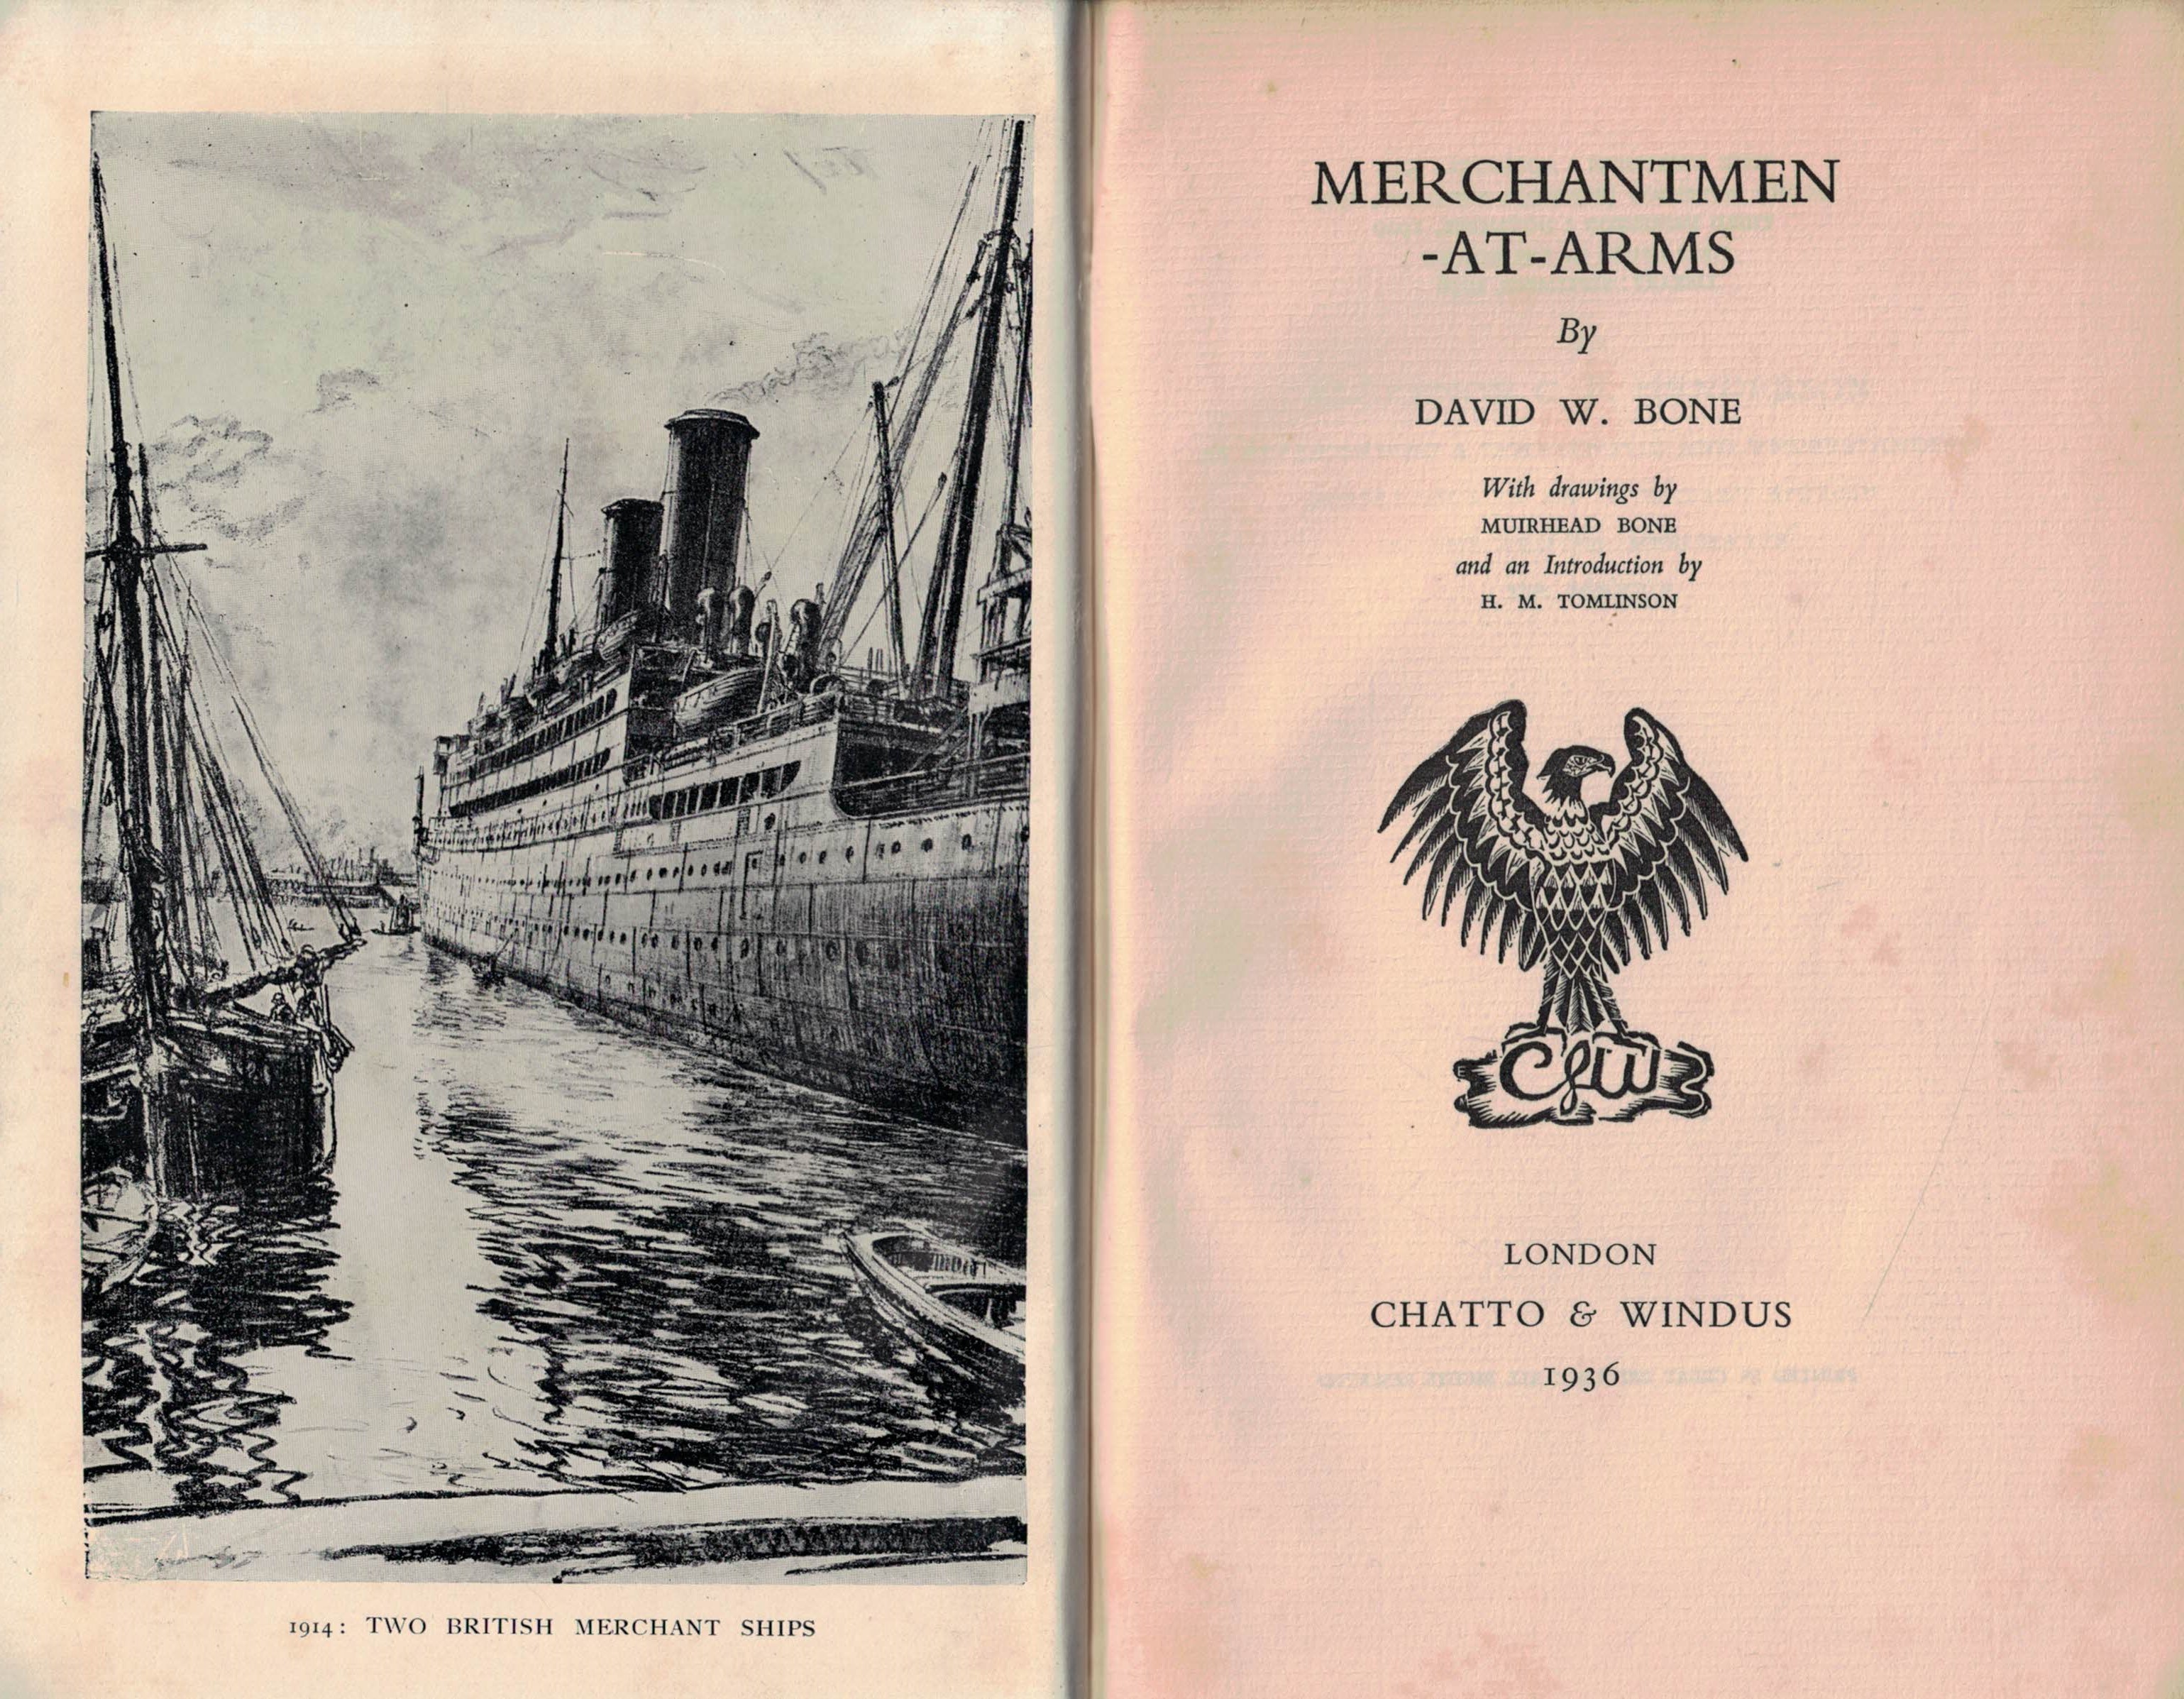 Merchantmen-at-Arms. The British Merchant's Service in the War. Signed copy.